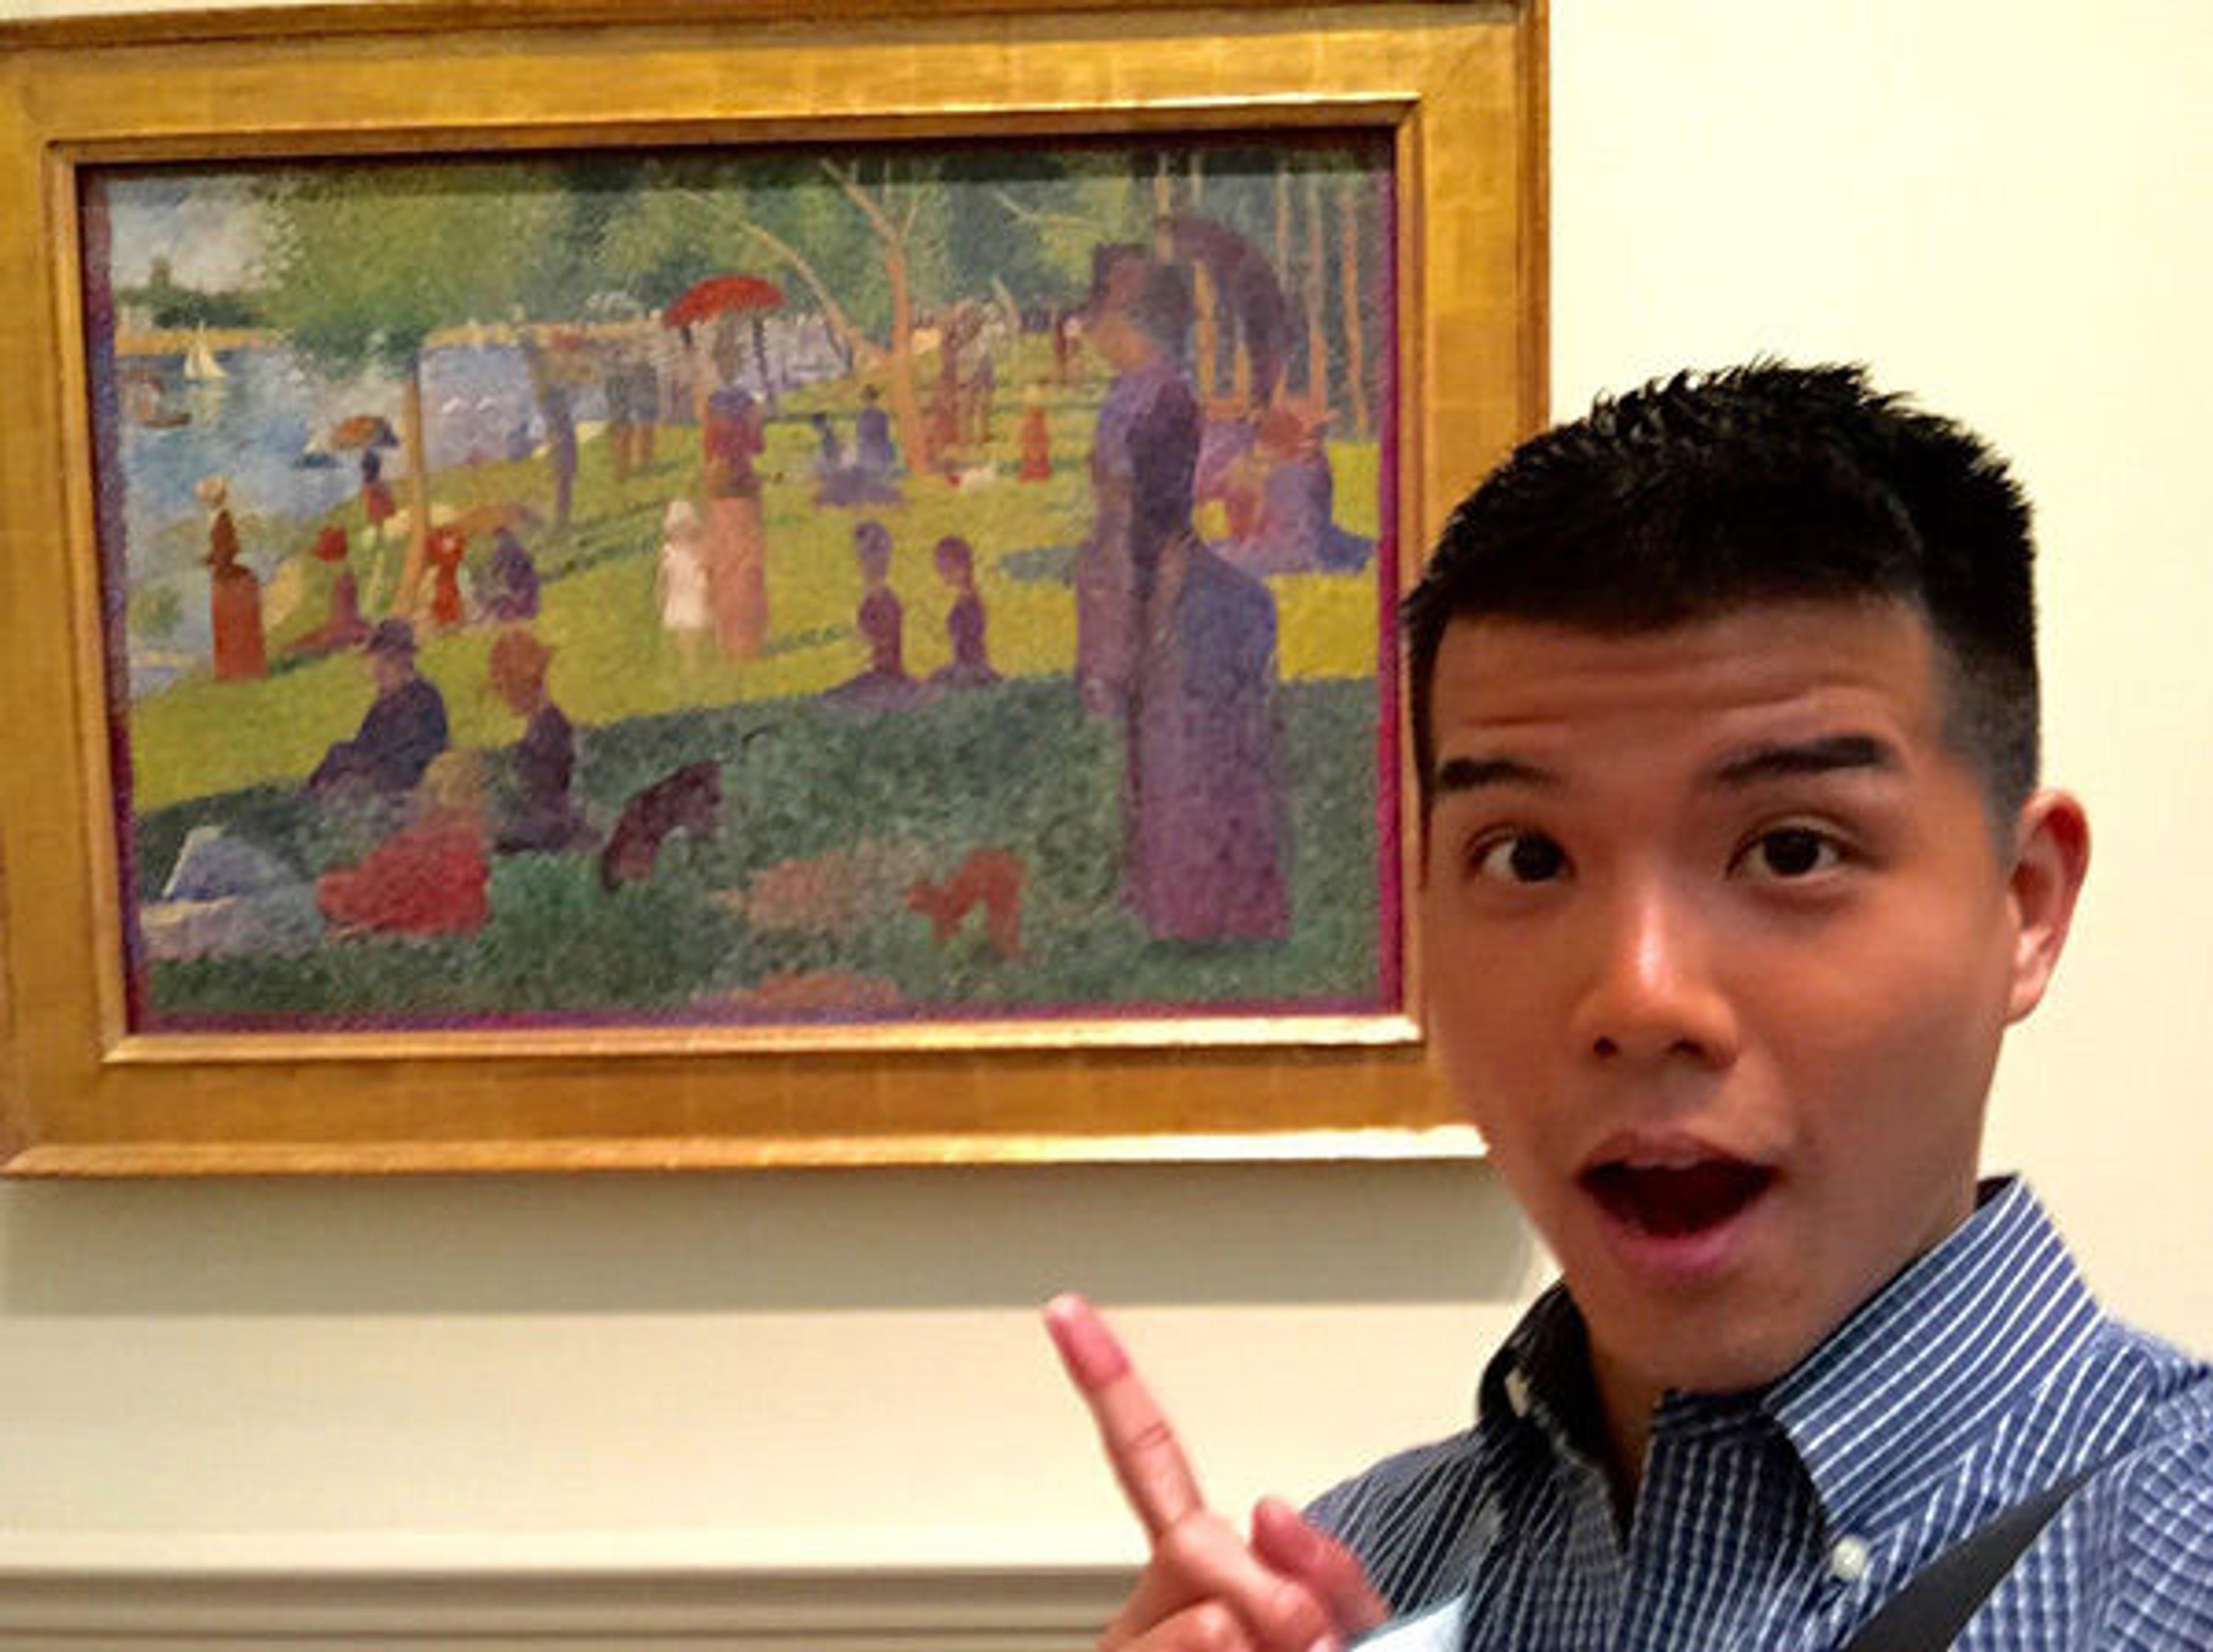 Telly admires George Seurat's study for "A Sunday on La Grande Jatte"